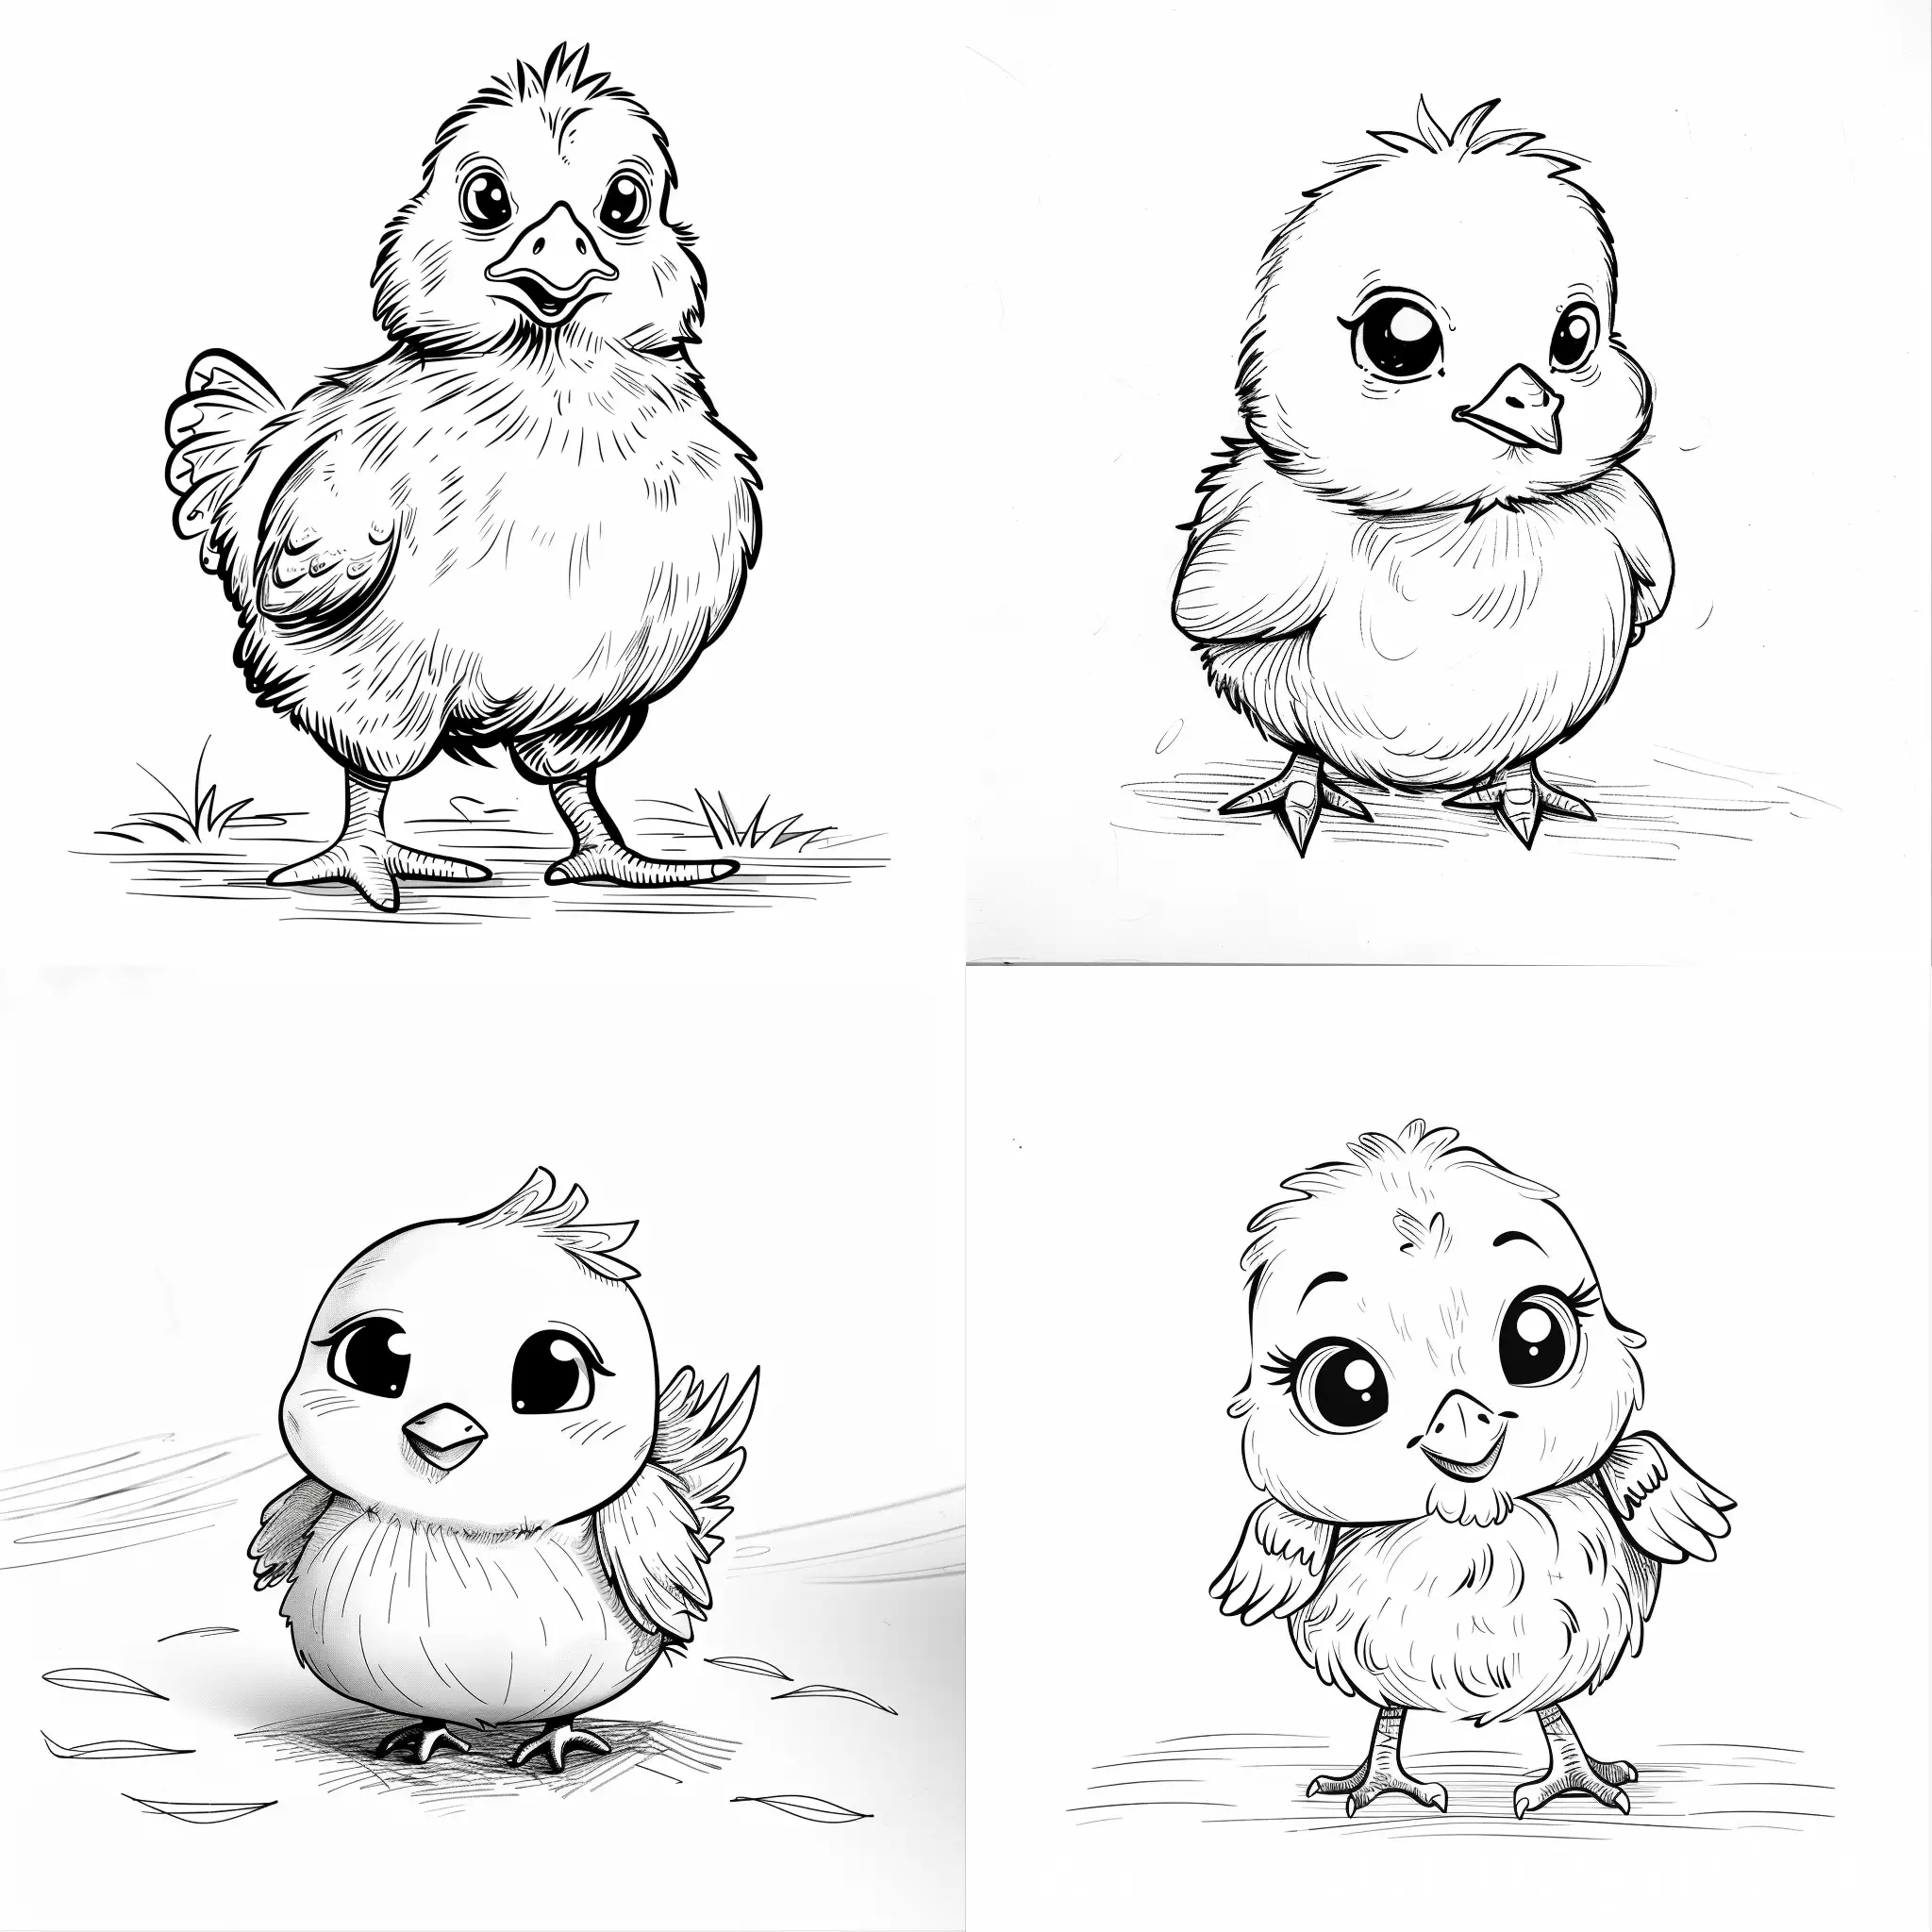 Adorable-Chicken-Drawing-for-Childrens-Coloring-Book